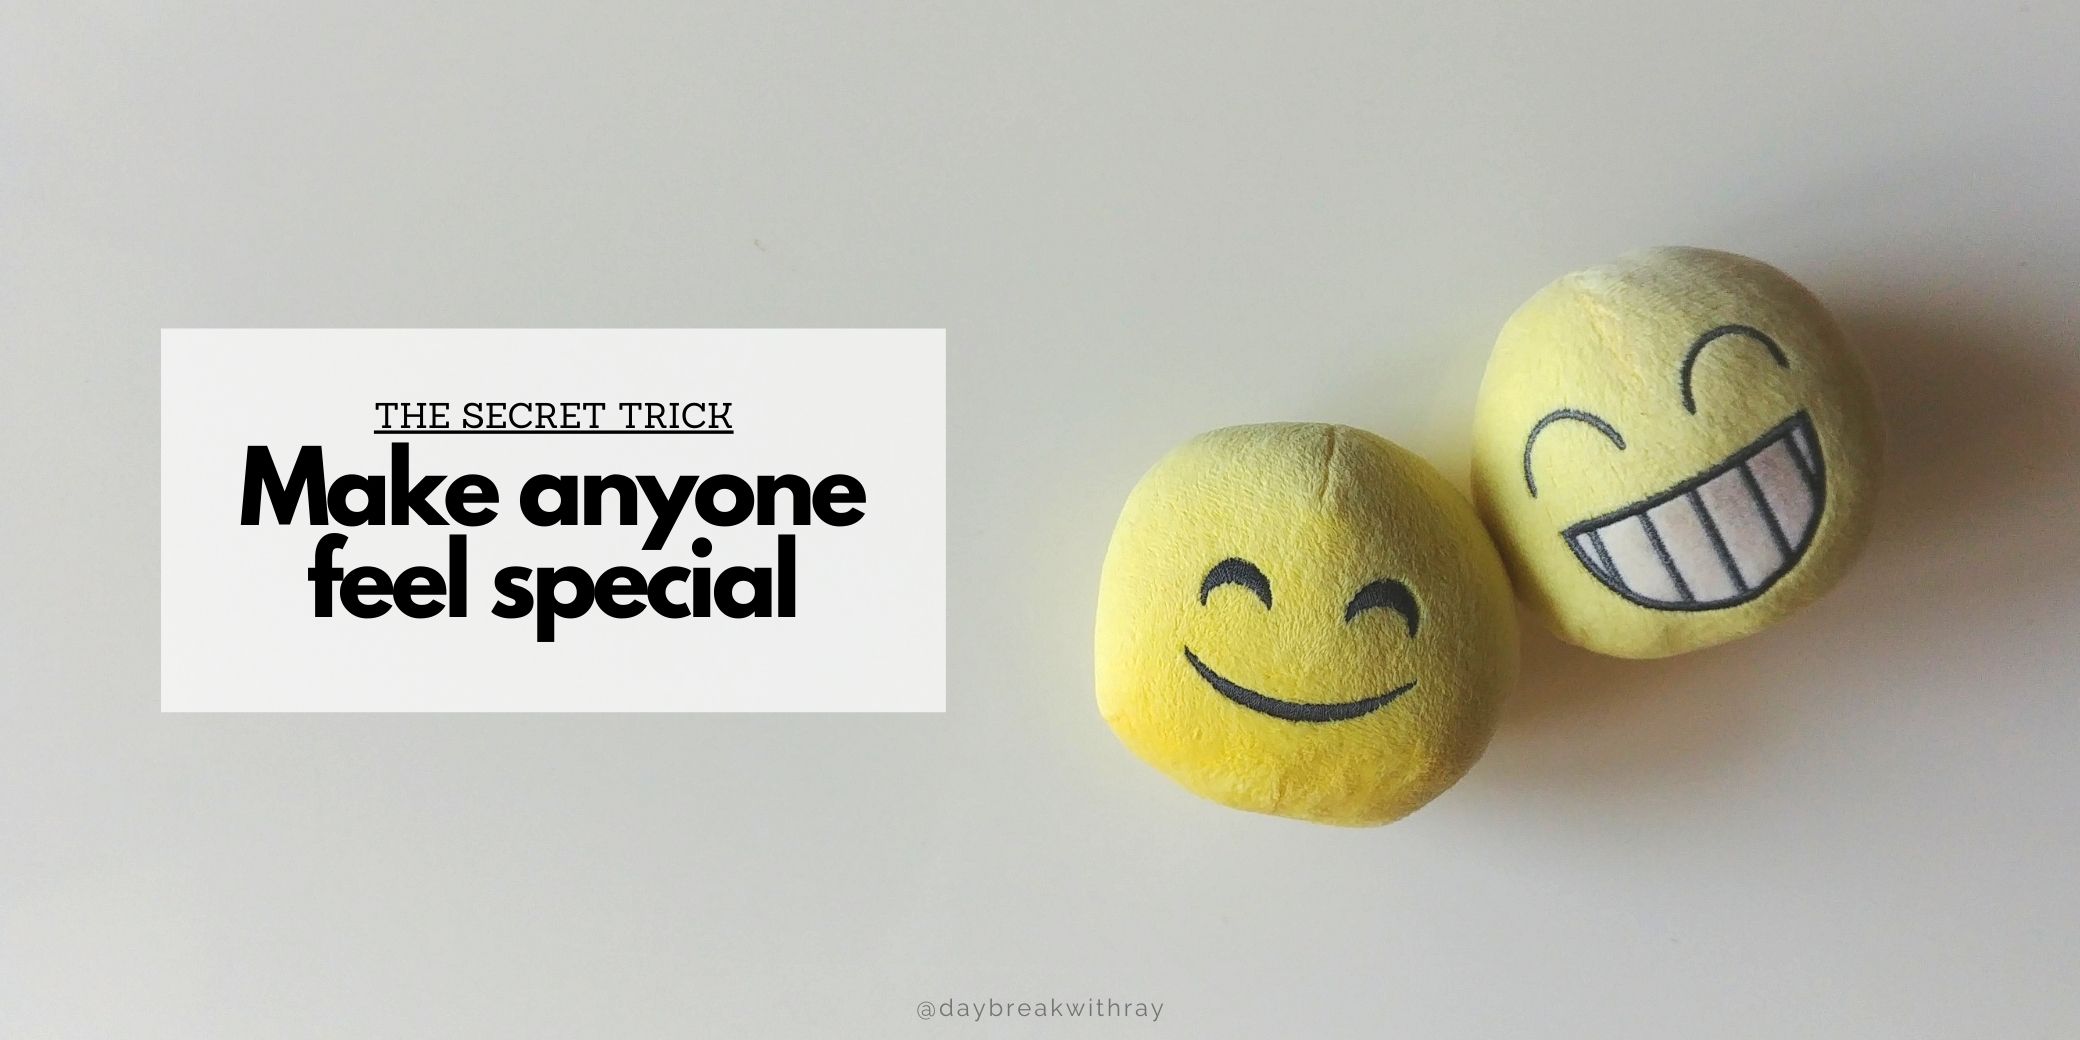 (Featured Image) Listen The Secret Trick to Make Anyone Feel Special